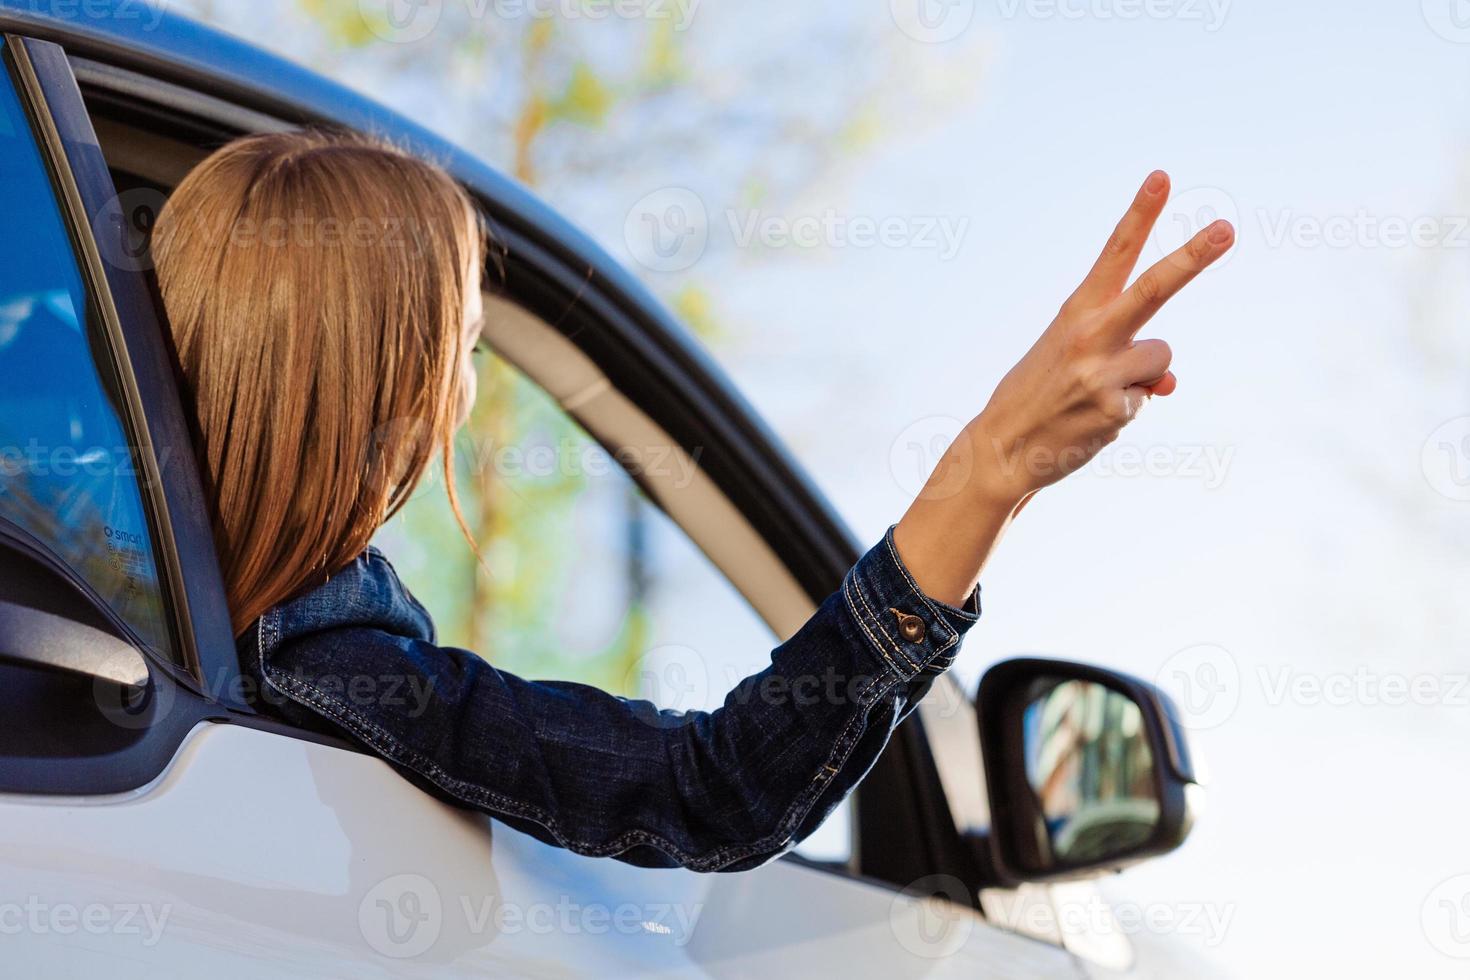 Happy woman waving her hand on an open windowed car against blue sky and sun. photo